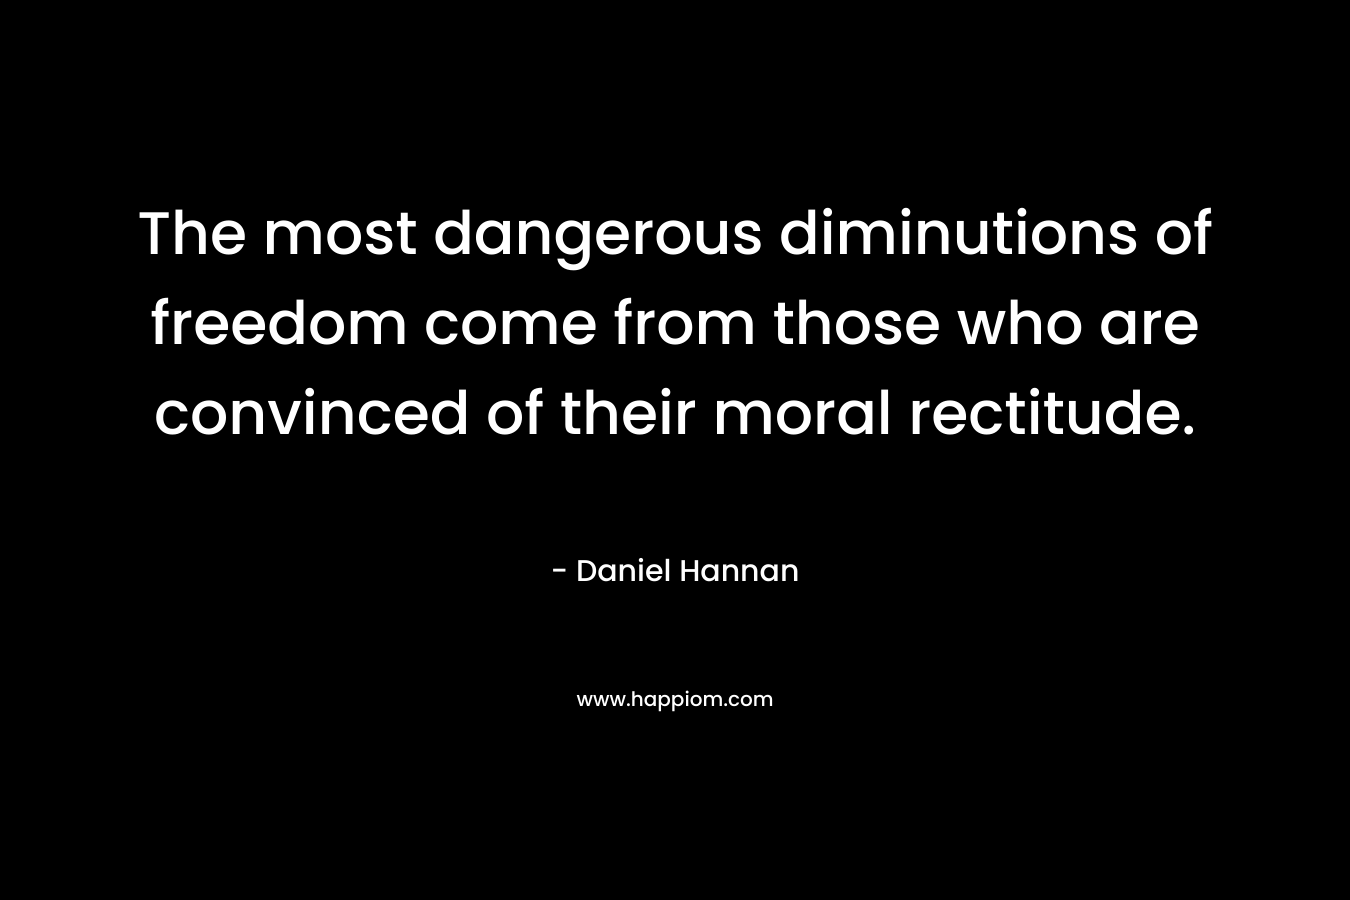 The most dangerous diminutions of freedom come from those who are convinced of their moral rectitude. – Daniel Hannan